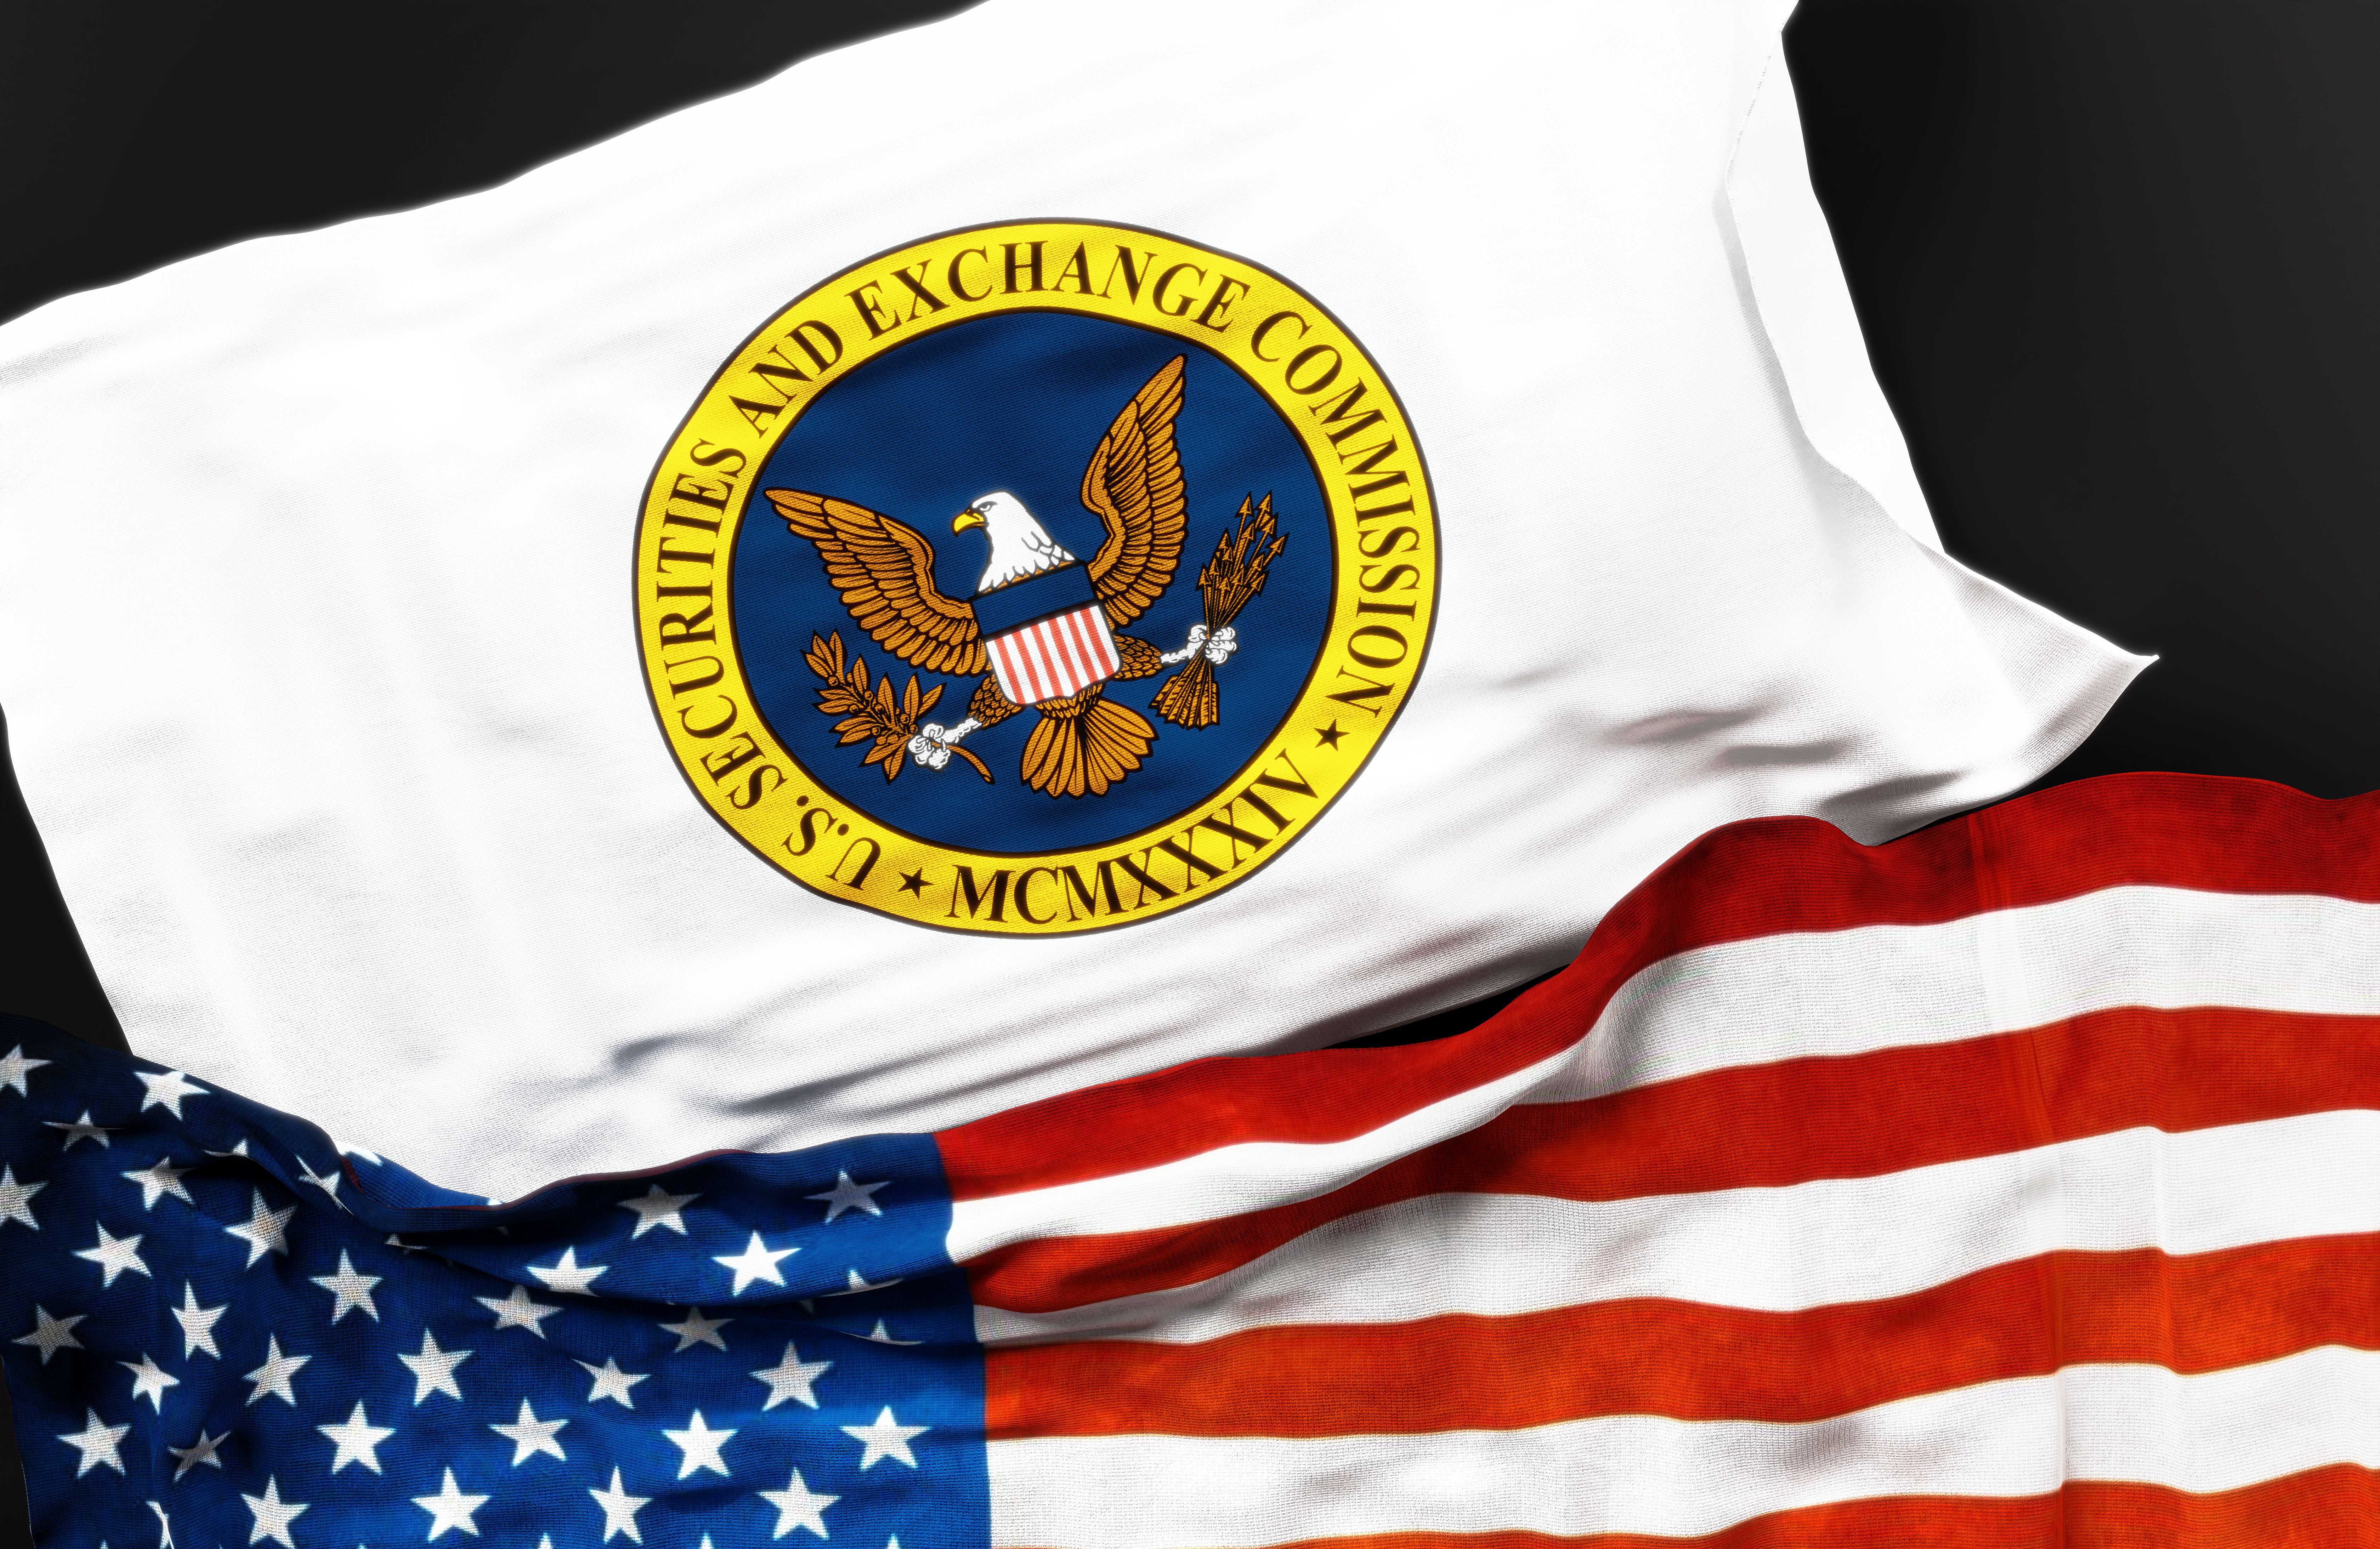 A flag of the United States Securities and Exchange Commission next to a flag of the United States of America.